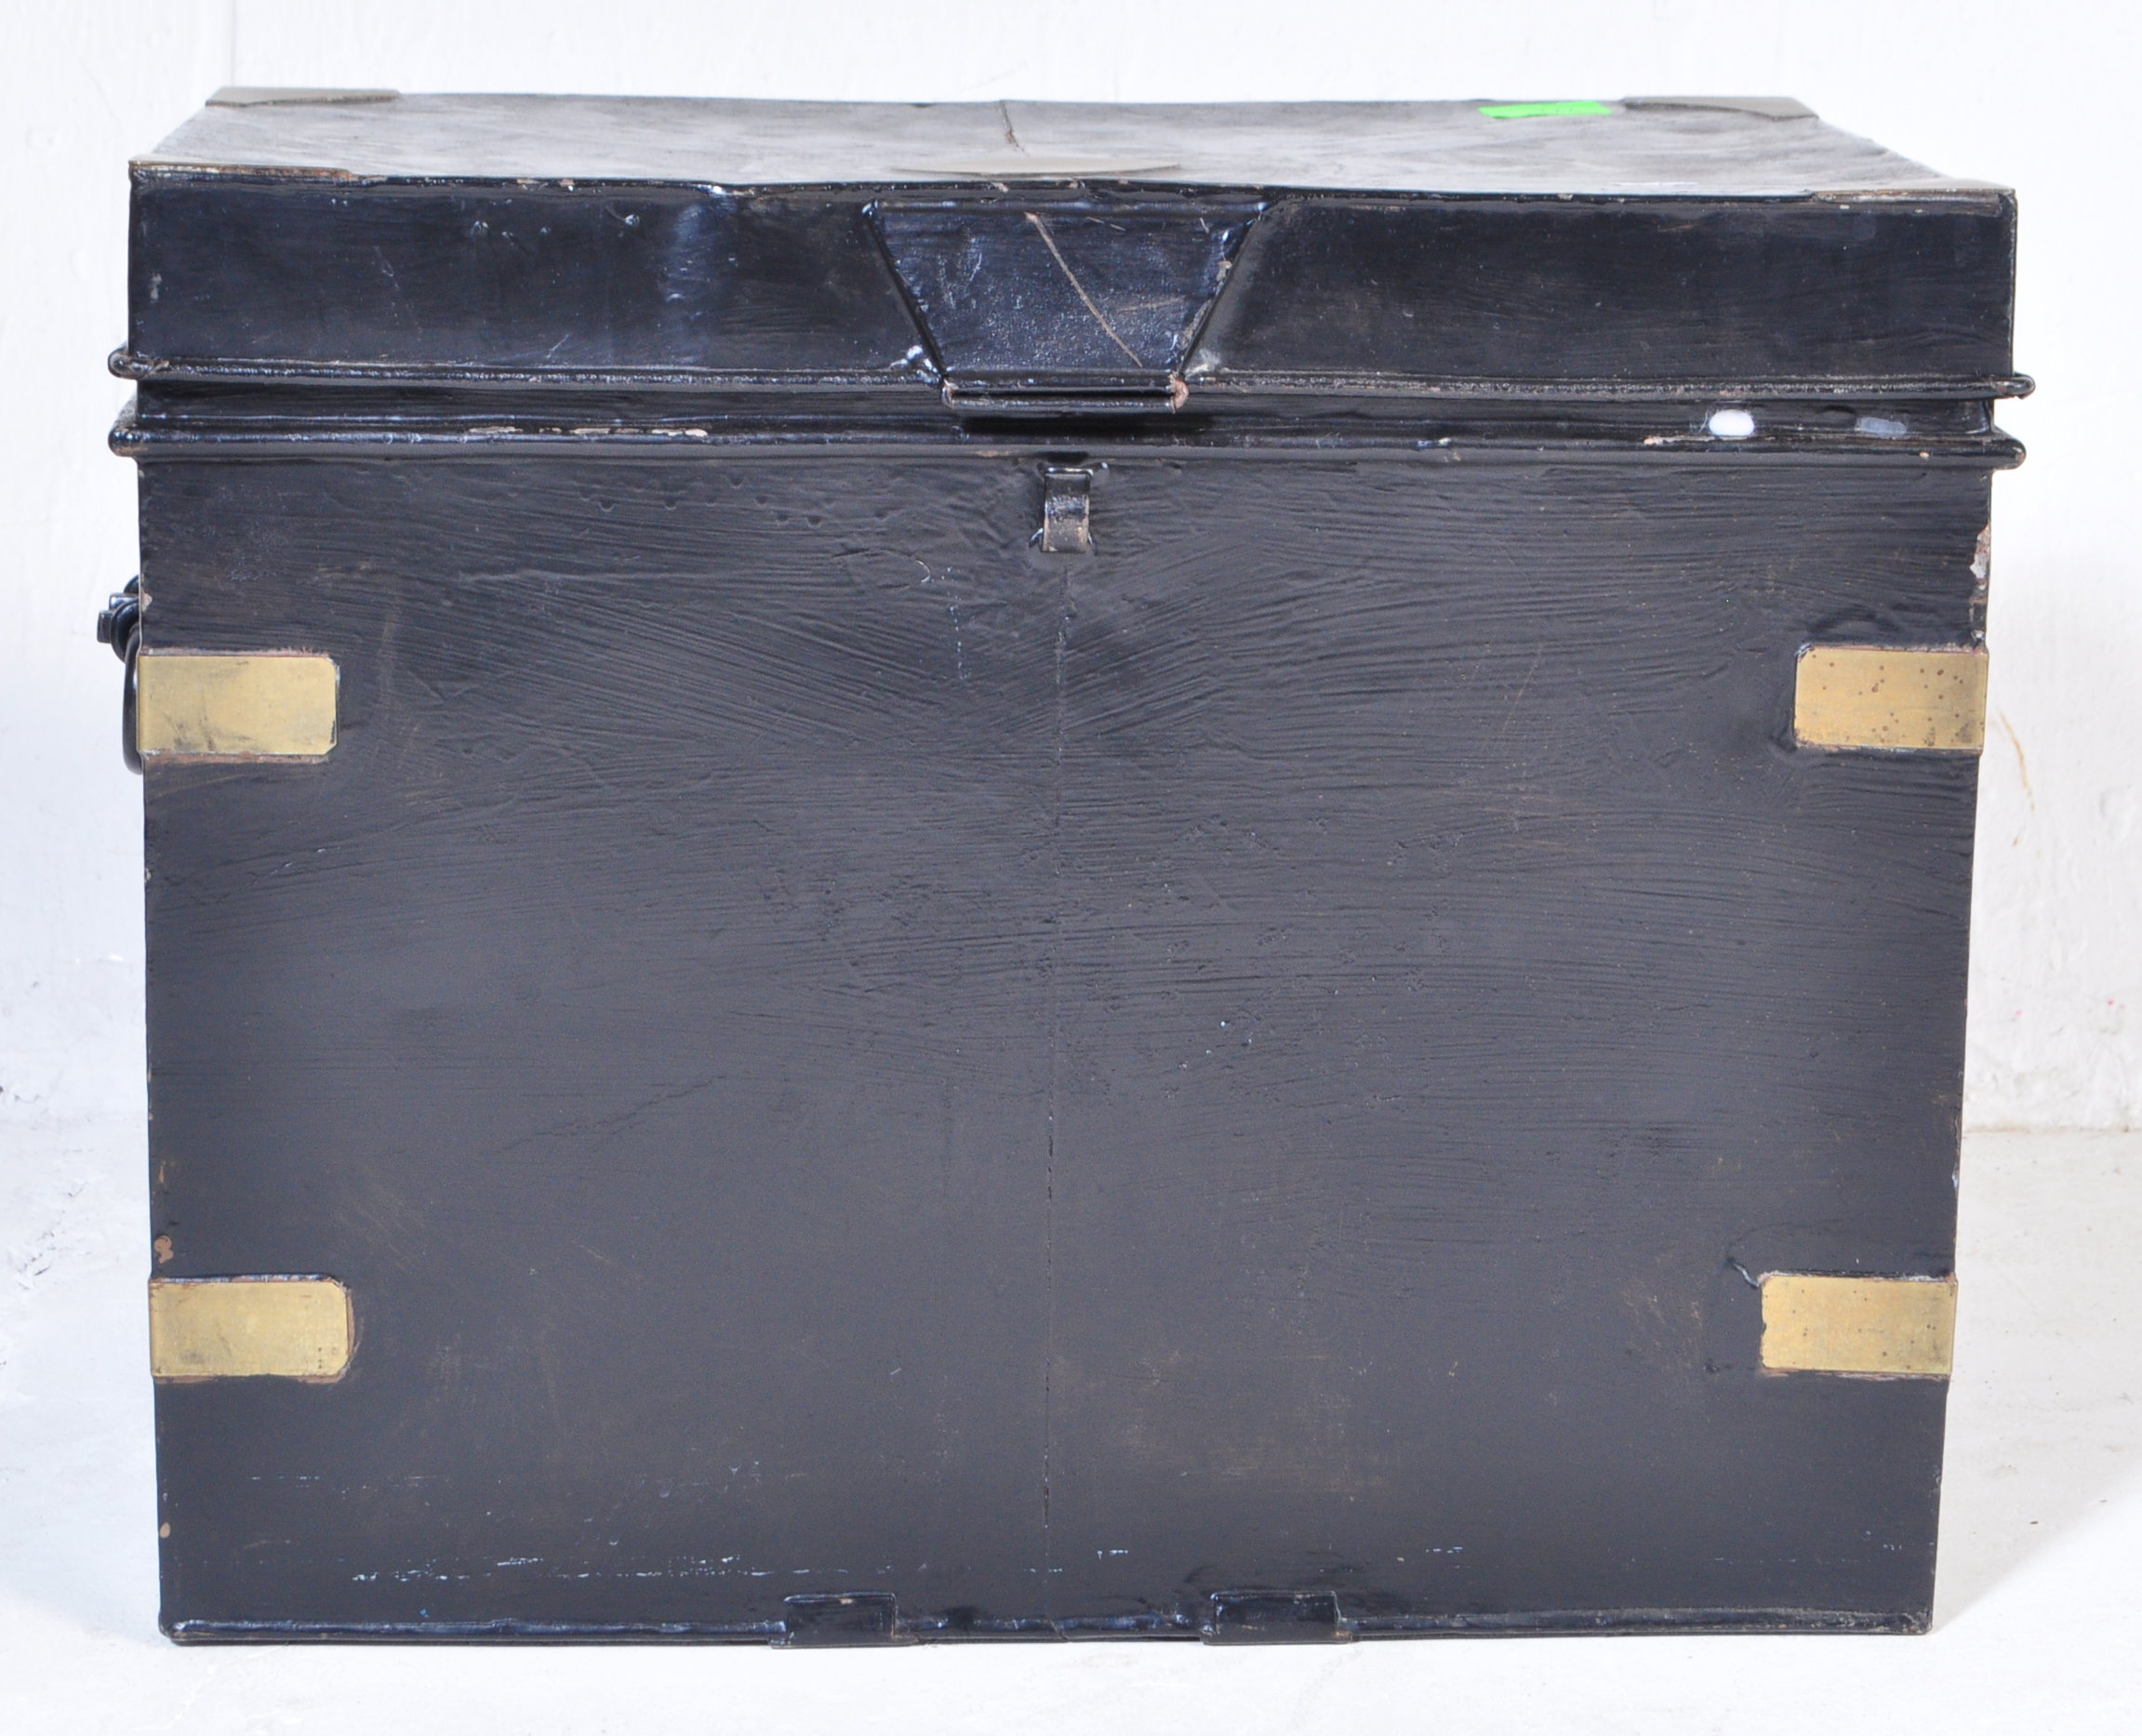 EARLY 20TH CENTURY BLACK METAL & BRASS DEEDS BOX - Image 3 of 5